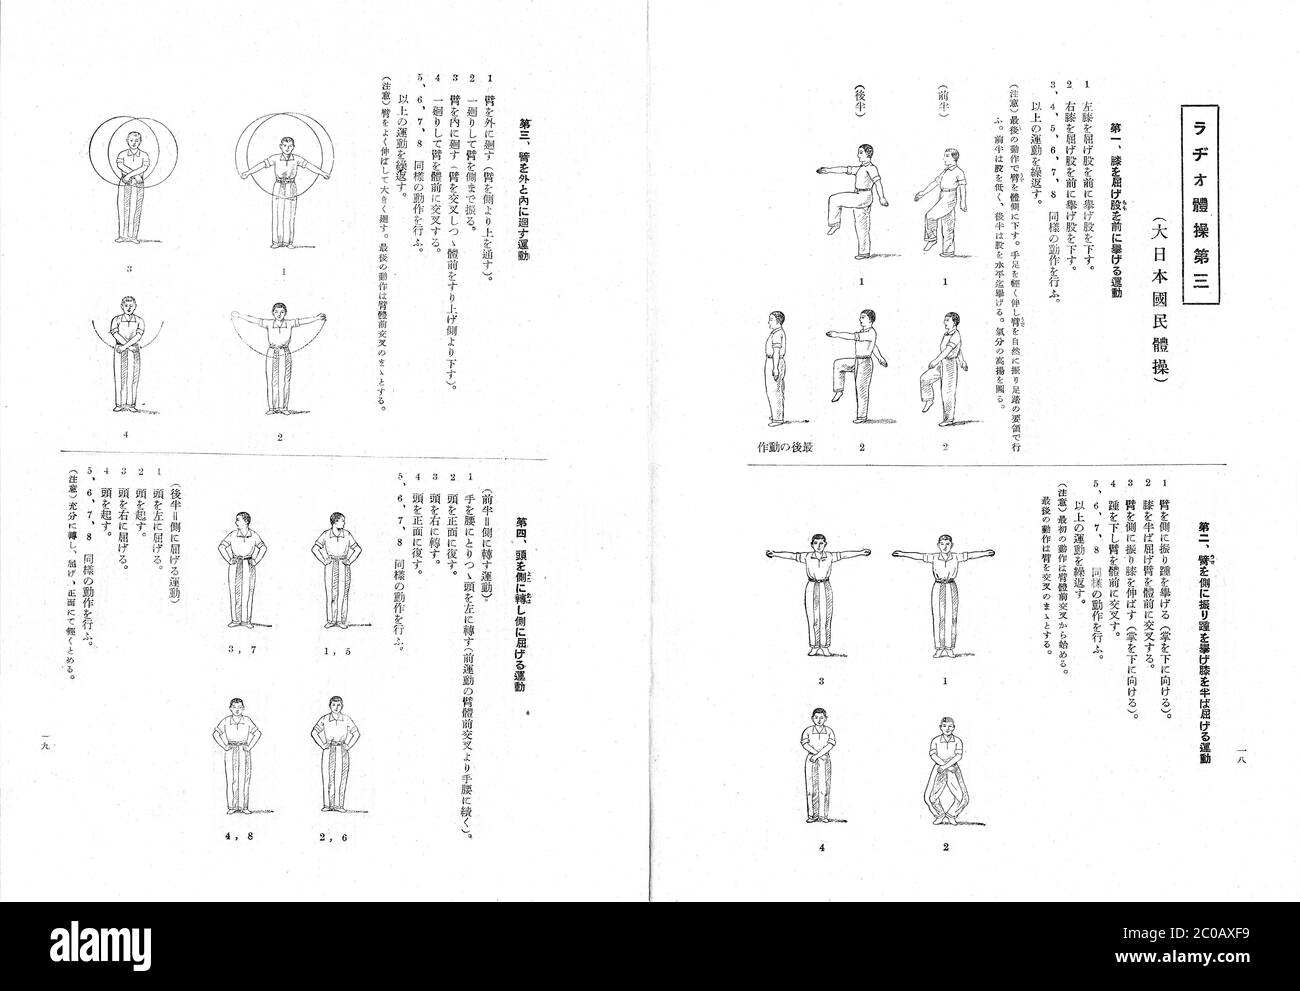 [ 1940s Japan - NHK Radio Calisthenics ] — Pages from sheet music with exercises for Japanese public broadcaster NHK’s radio calisthenics program (ラジオ体操), published in 1940 (Showa 15 ).  Radio calisthenics were introduced to Japan in 1928 (Showa 3) as a commemoration of the coronation of Emperor Hirohito.  Because of their militaristic nature, the broadcasts were banned by the occupying powers after Japan's defeat in 1945 (Showa 20). They were restarted in 1951 (Showa 26).  20th century vintage flyer. Stock Photo